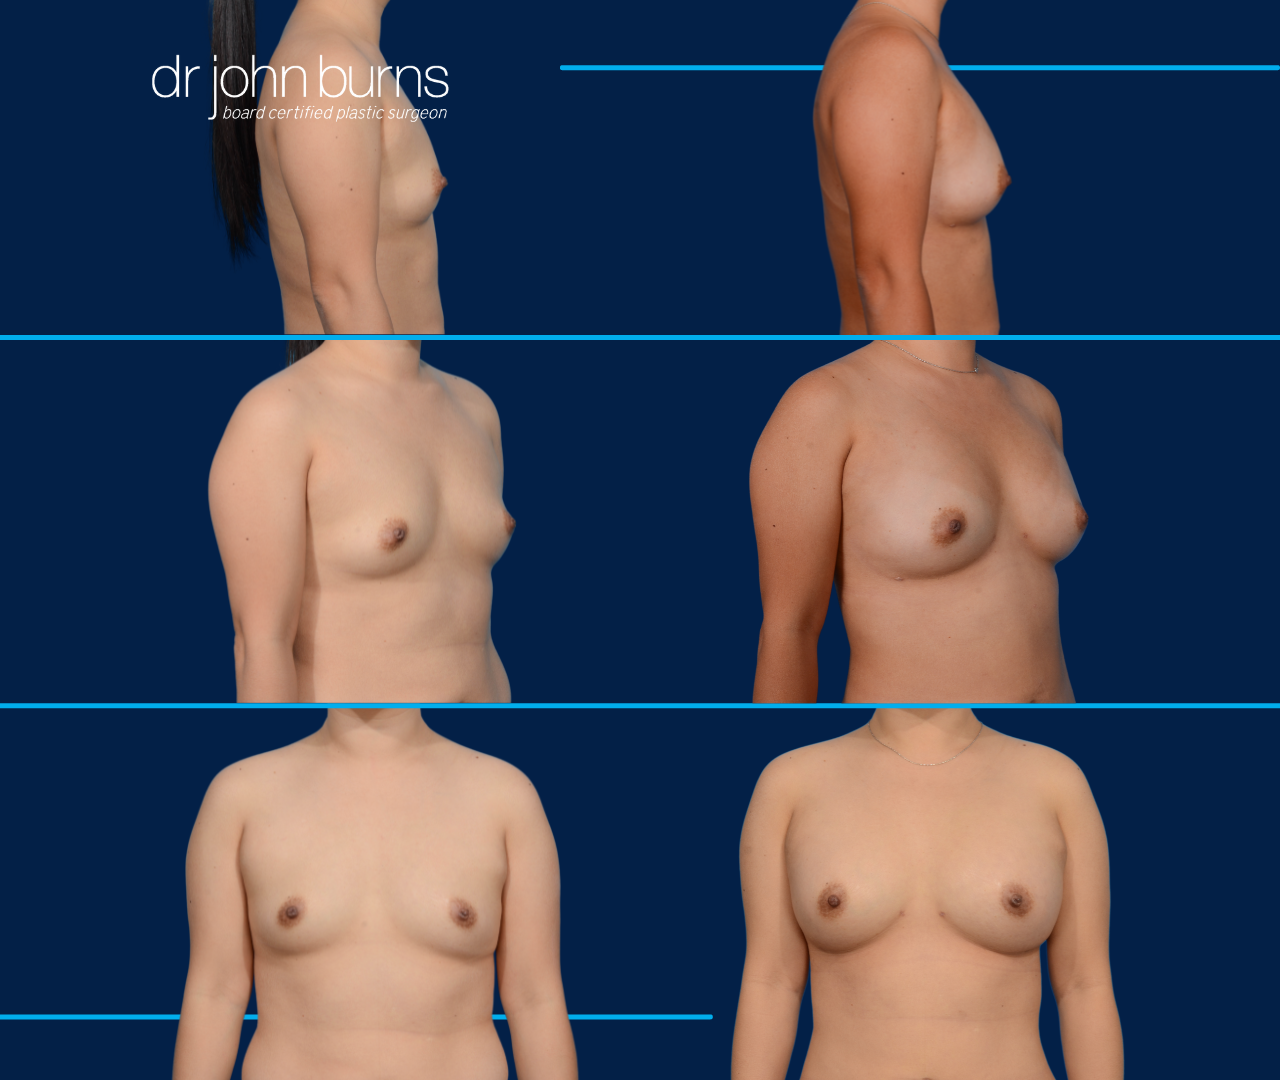 Before and After Fat grafting to breasts